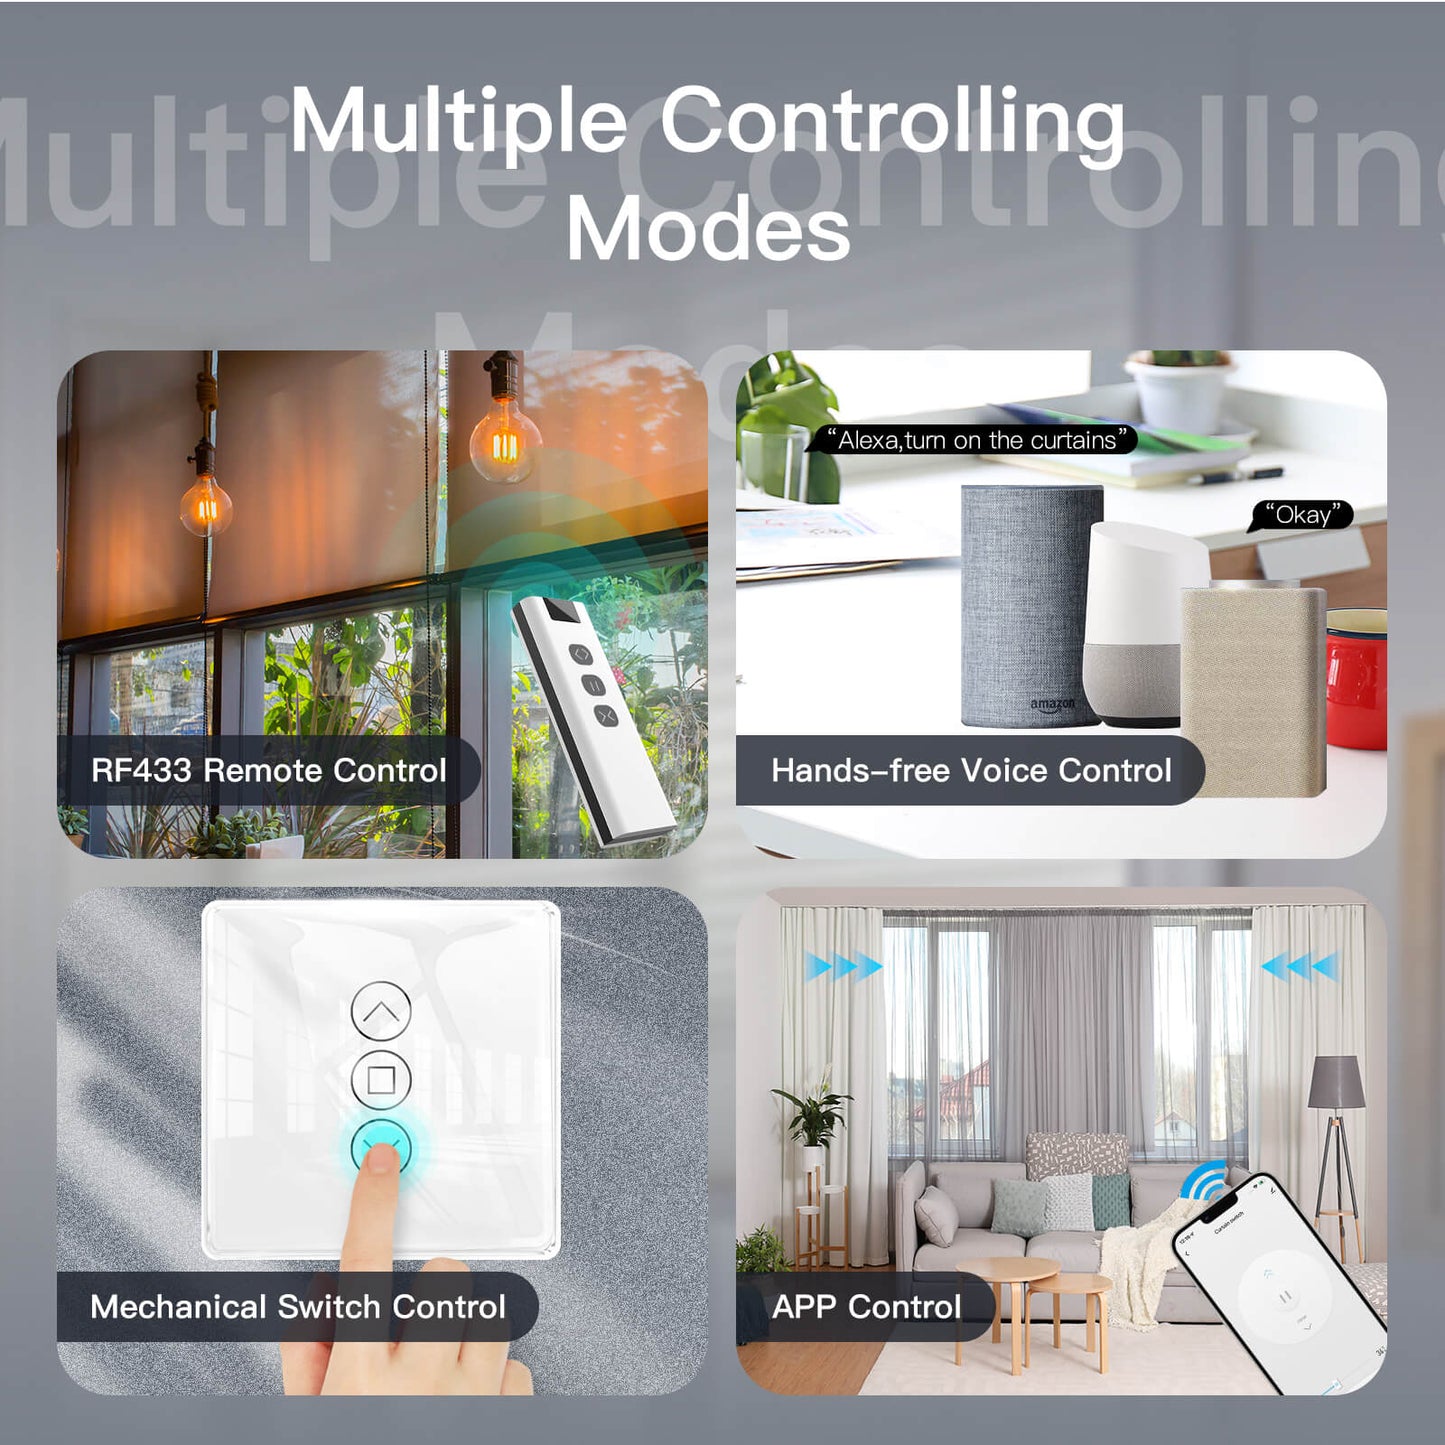 Multiple Controlling Modes - MOES